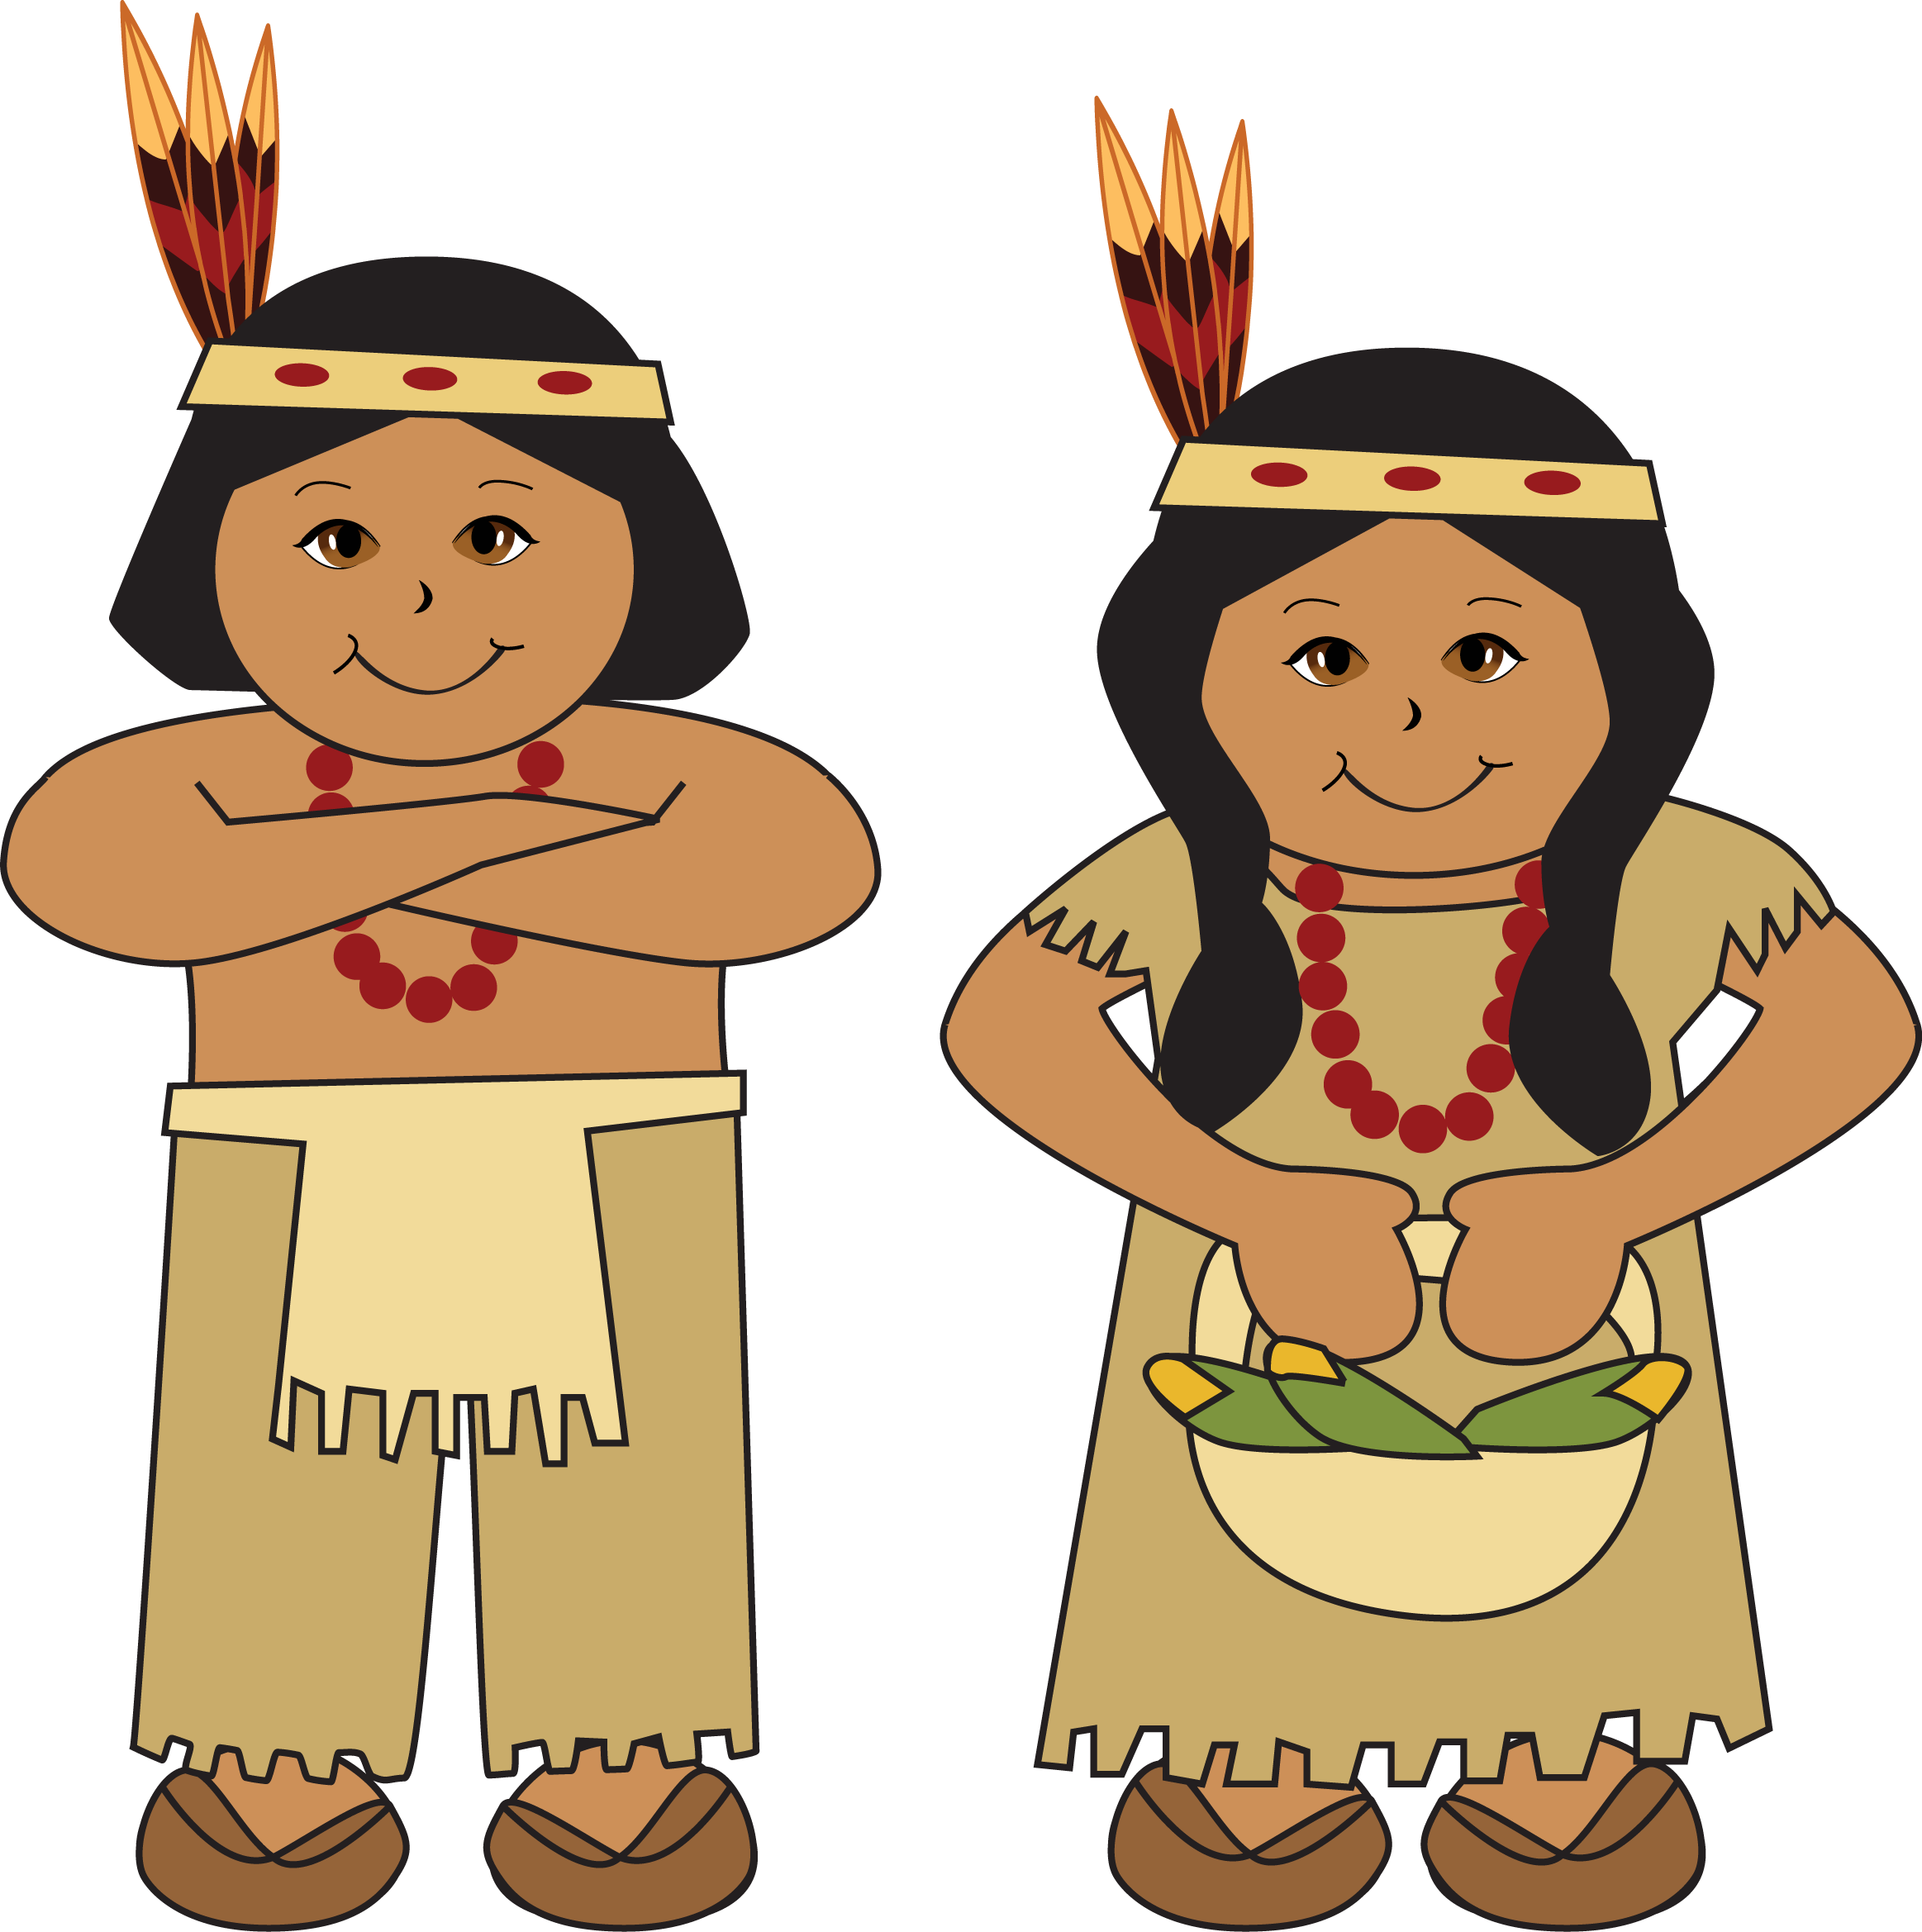 Pilgrims and indians clipart kid